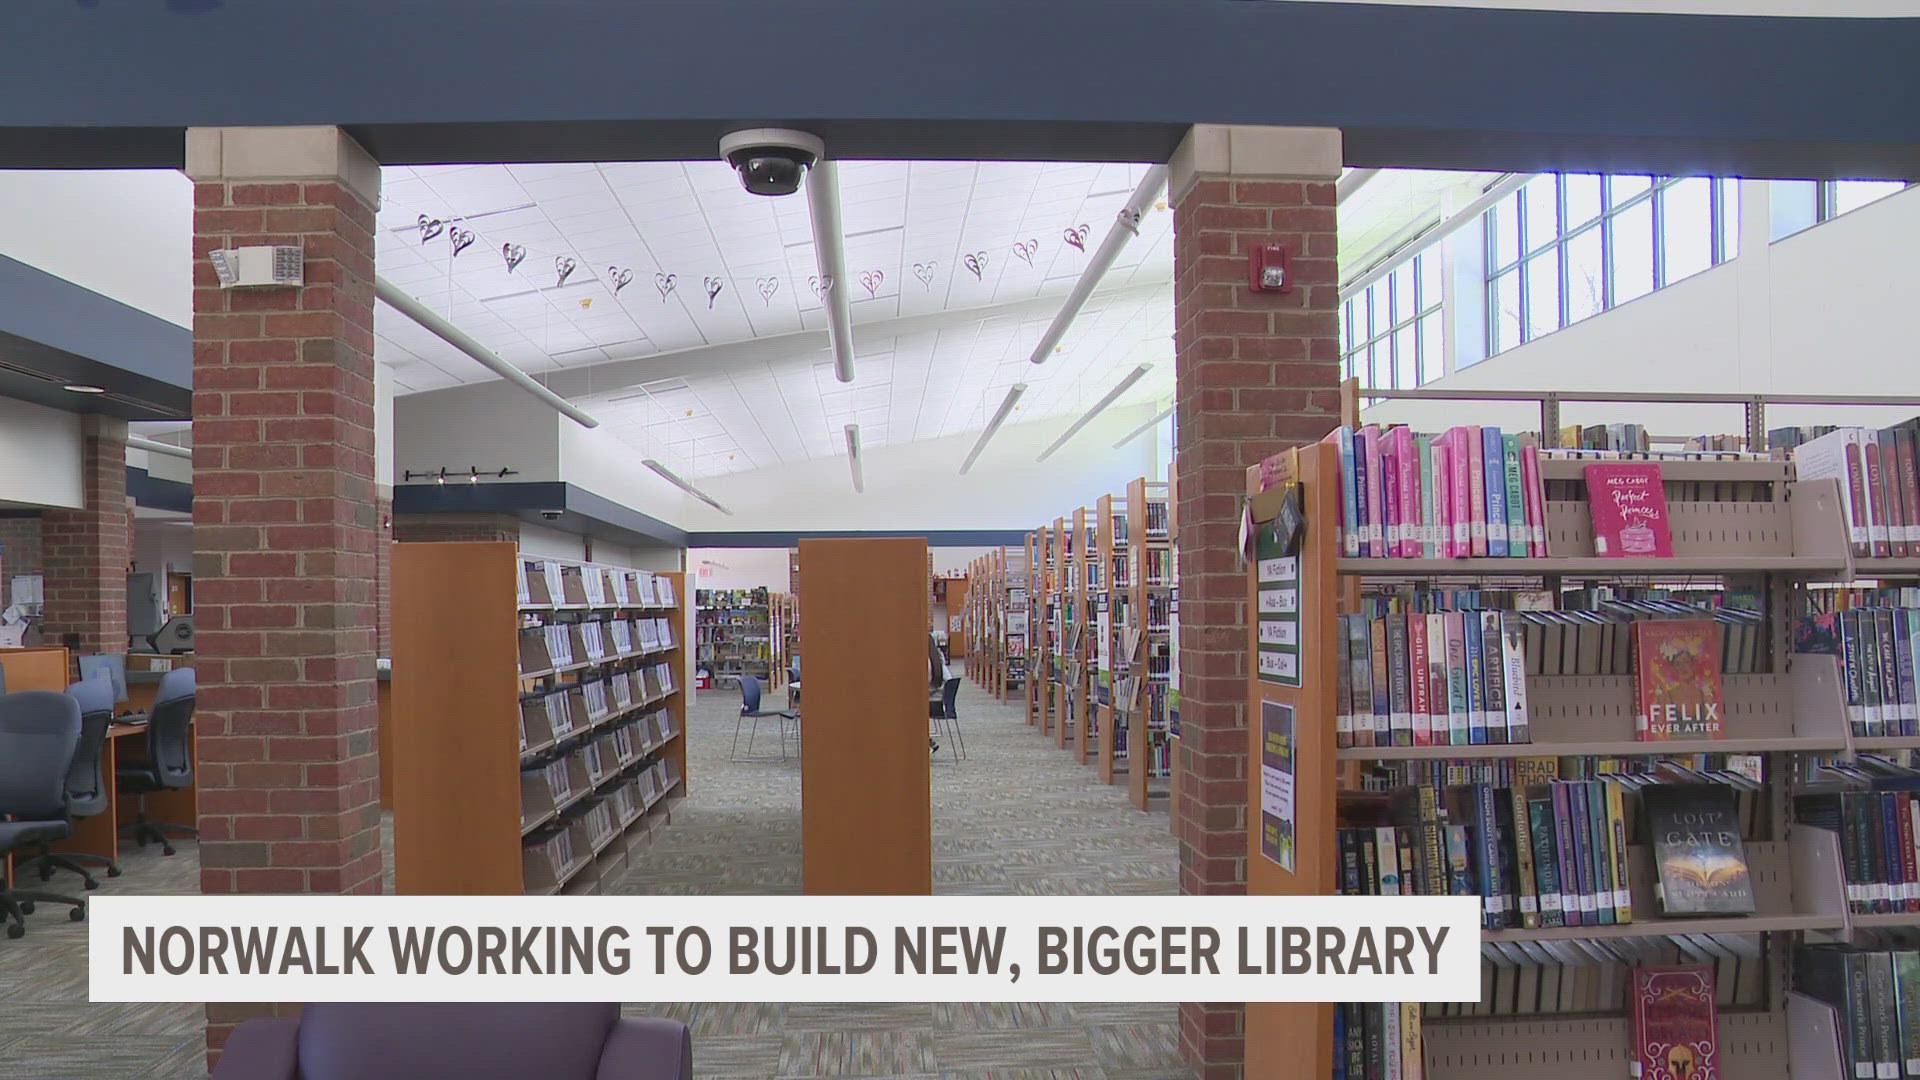 The library's director says the project is necessary to meet the needs of a growing community.